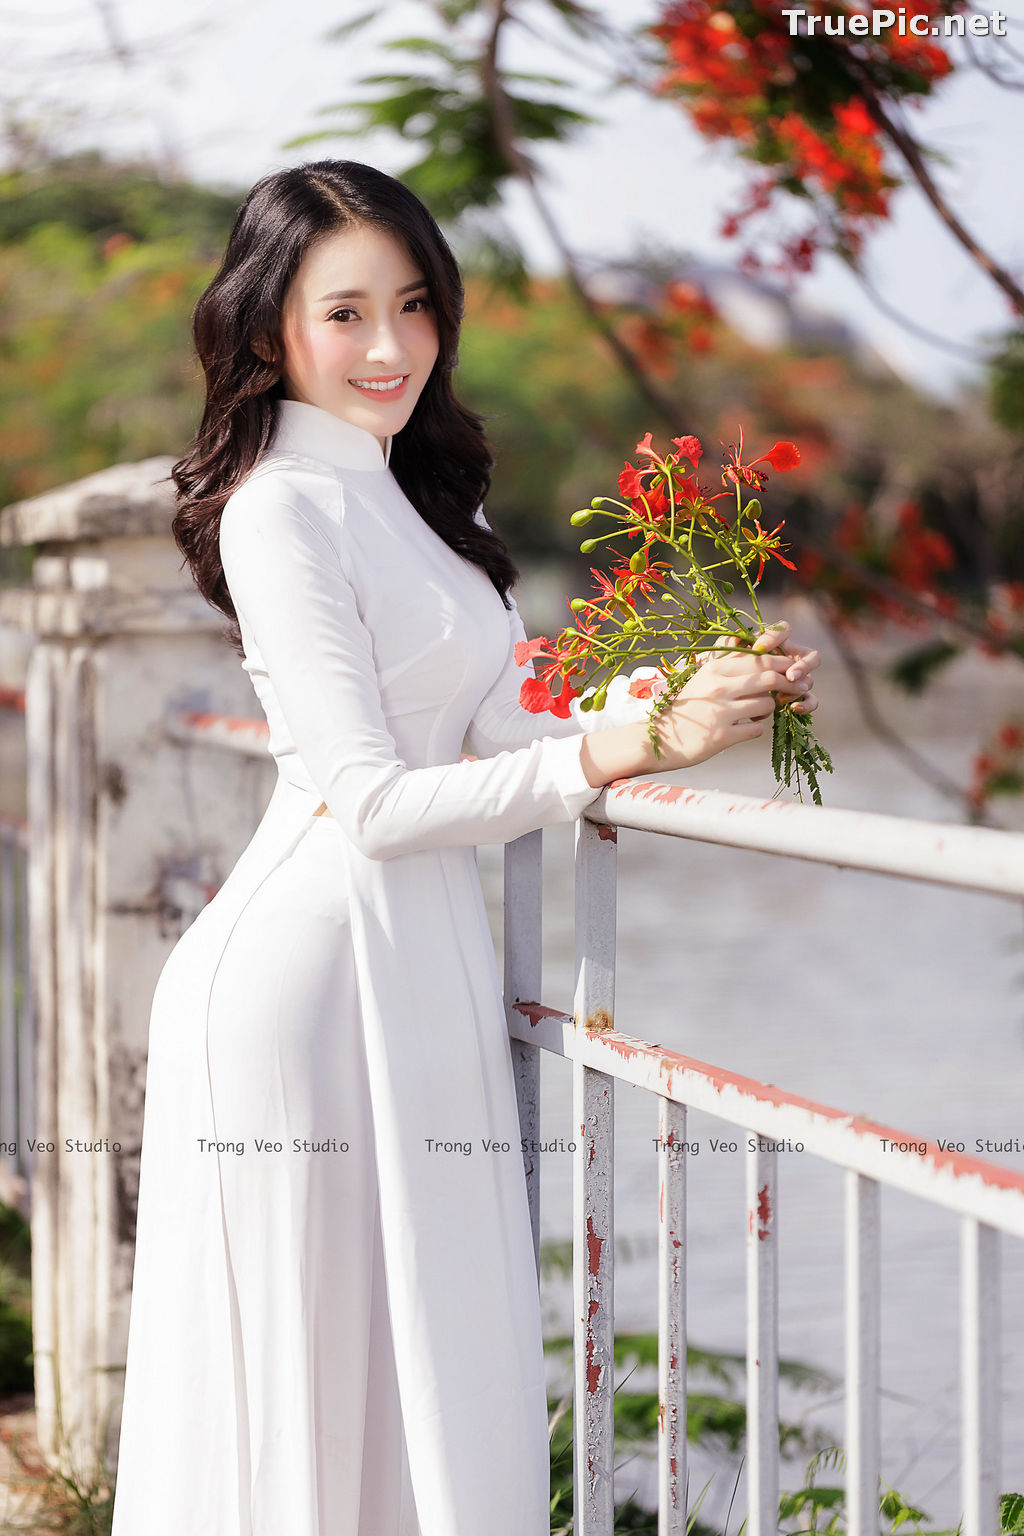 Image The Beauty of Vietnamese Girls with Traditional Dress (Ao Dai) #3 - TruePic.net - Picture-42